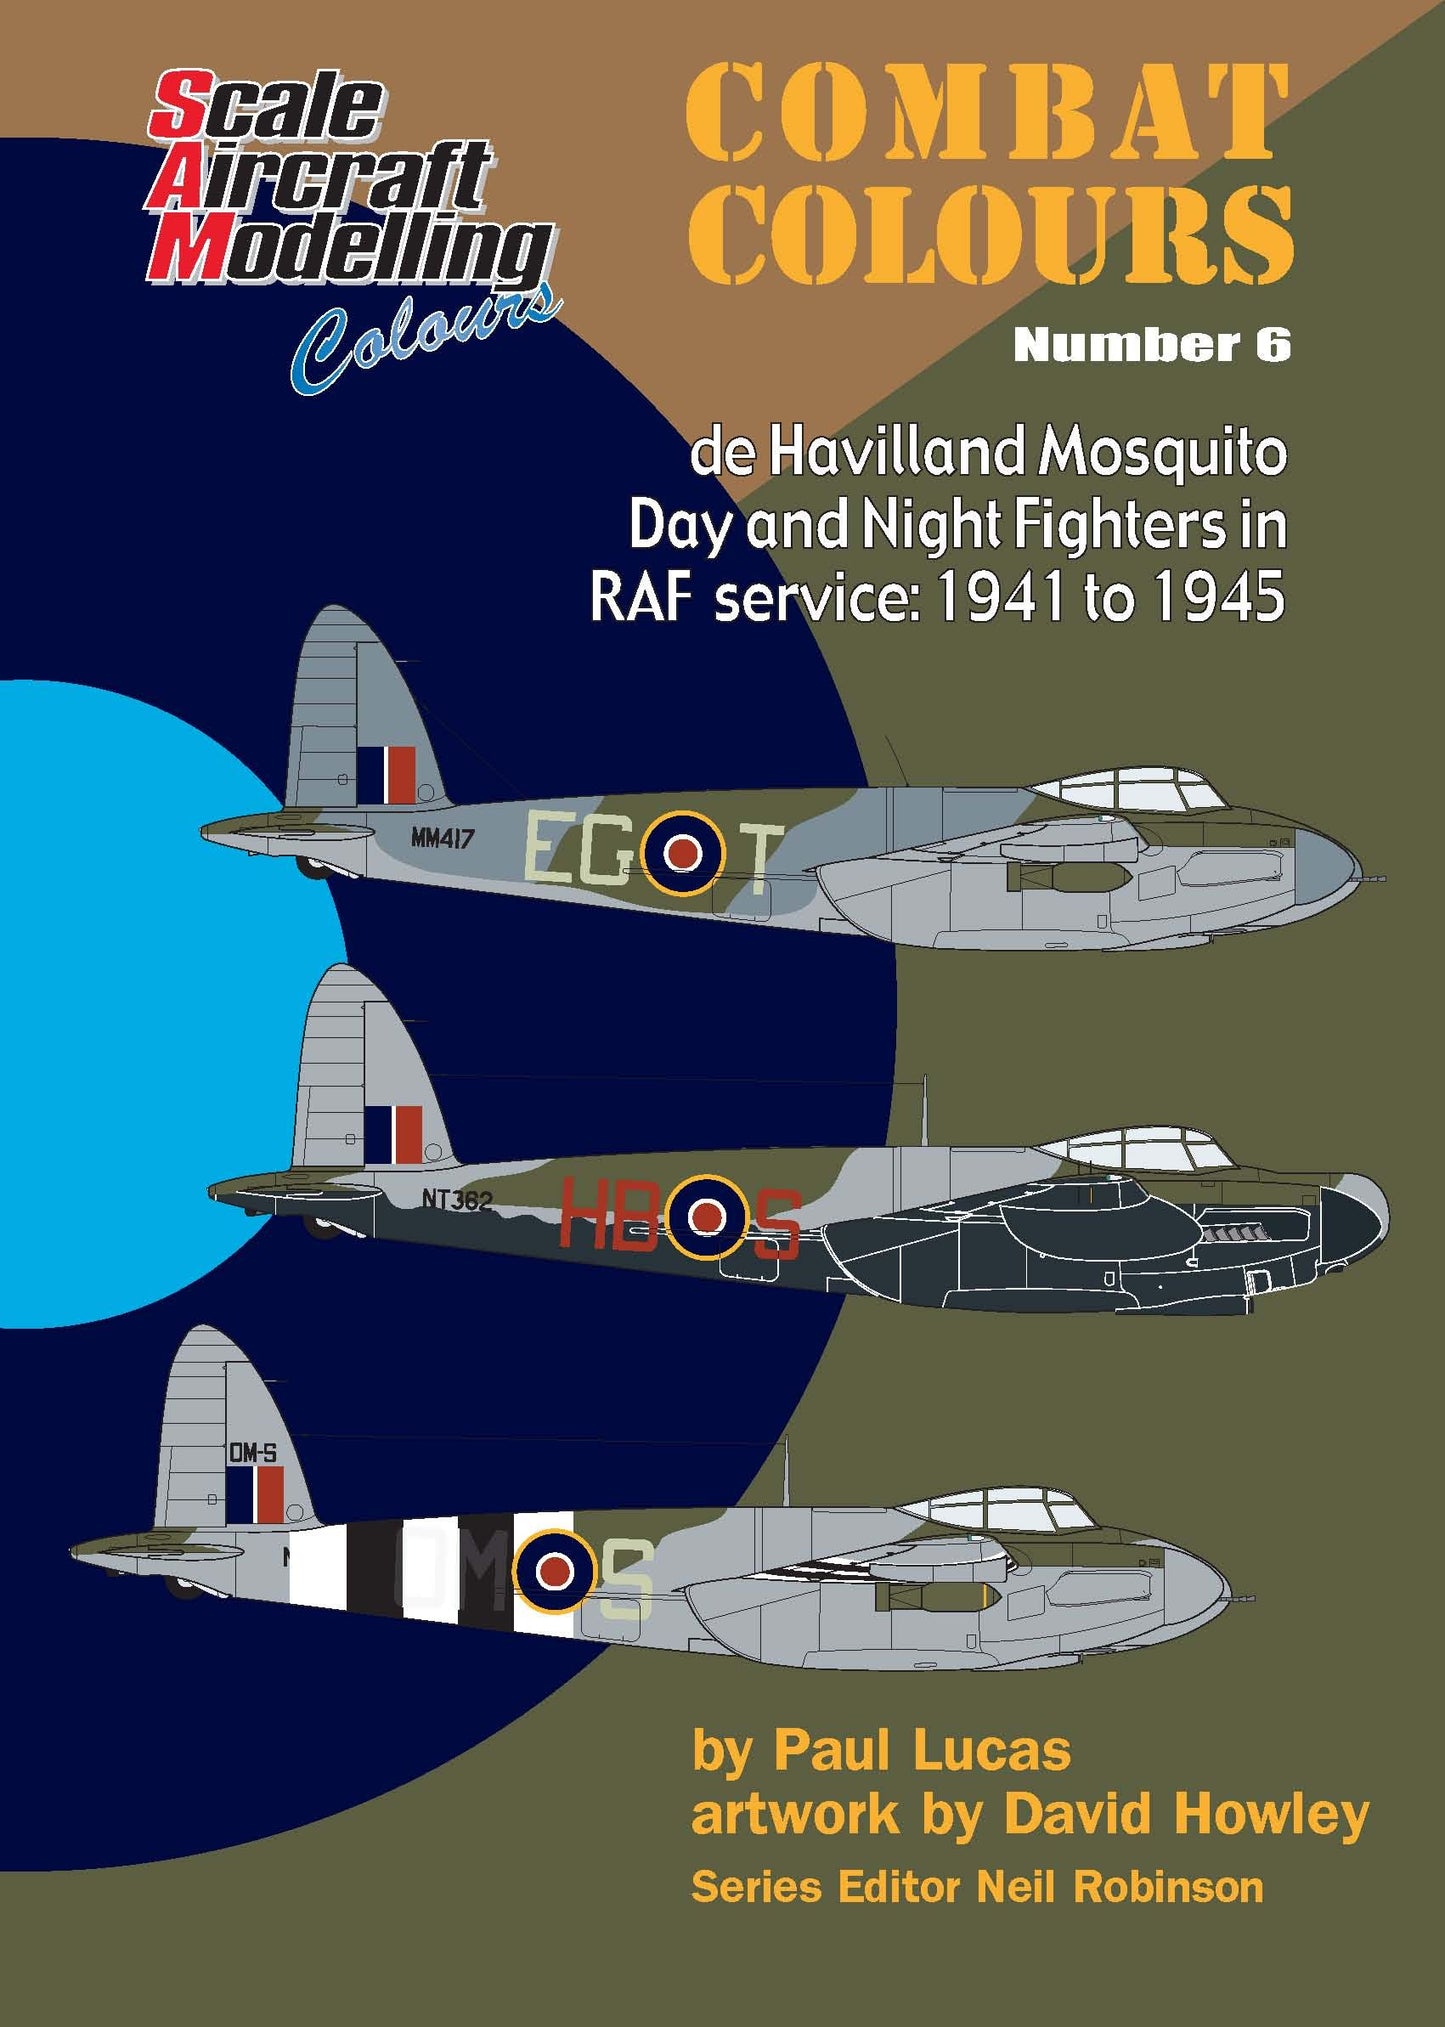 Combat Colours no 6 de Havilland Mosquito Day and Night Fighters